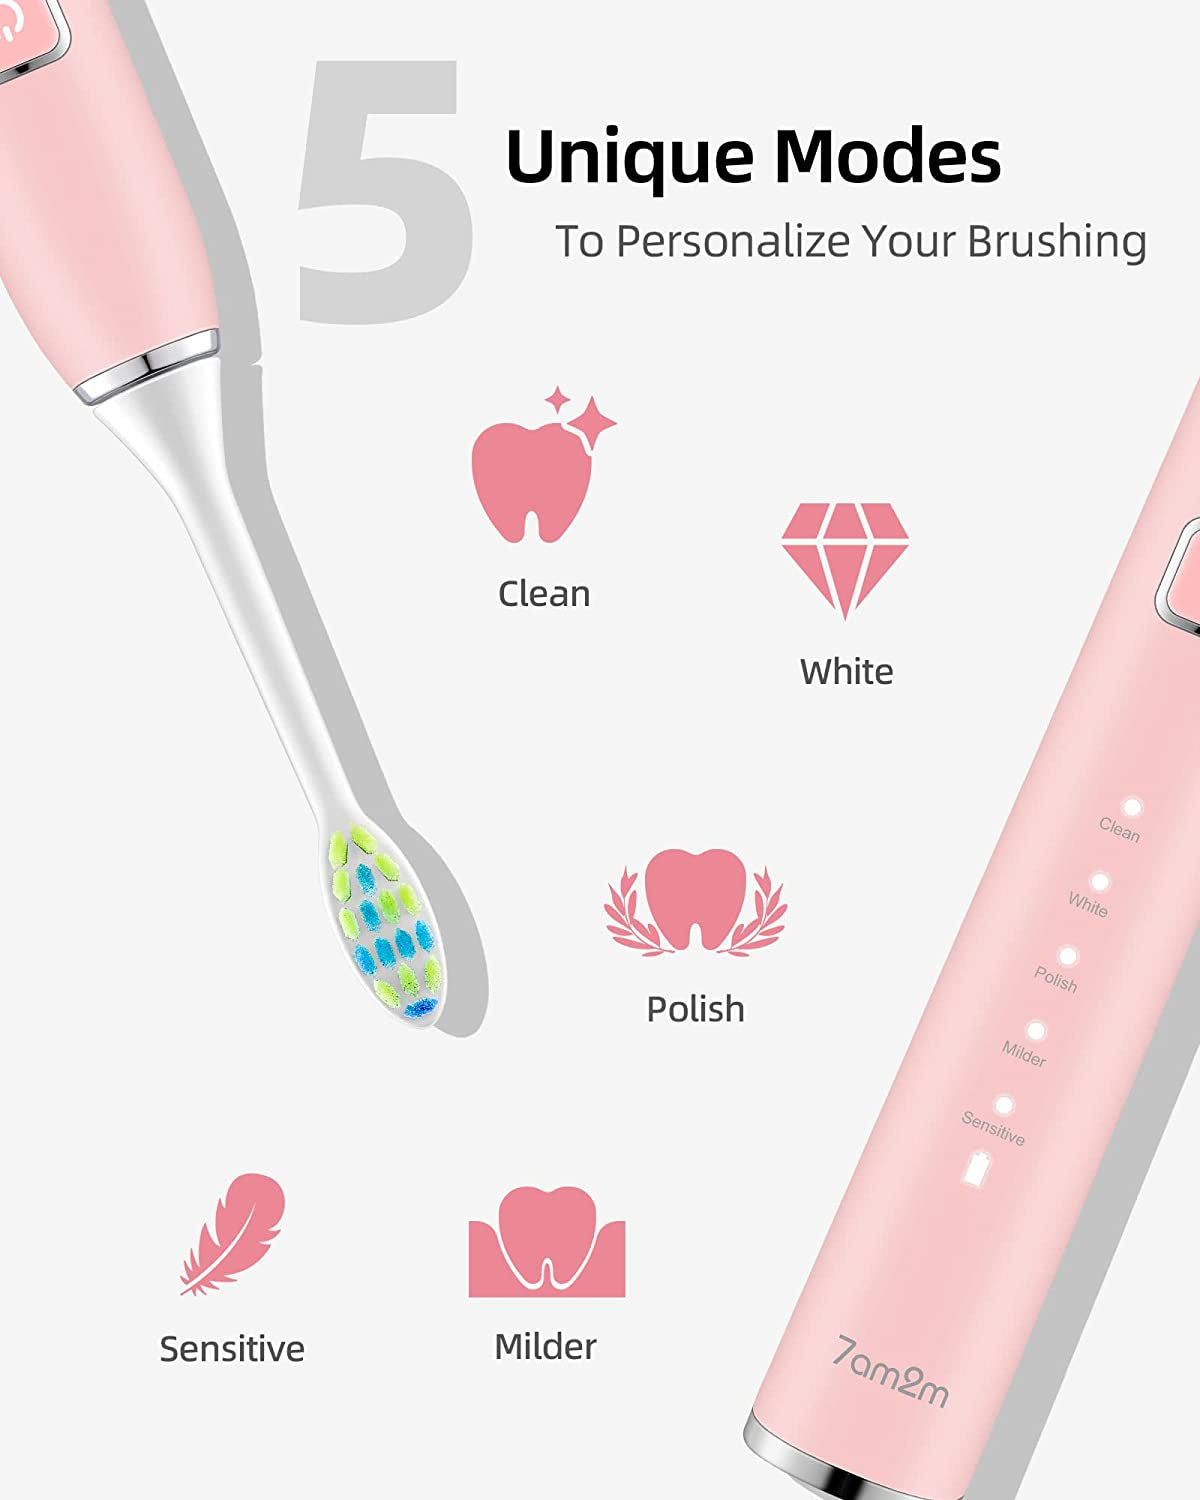 Sonic Electric Toothbrush with 6 Brush Heads for Adults and Kids, One Charge for 90 Days, Wireless Fast Charge, 5 Modes with 2 Minutes Built in Smart Timer, Electric Toothbrushes(Pink)